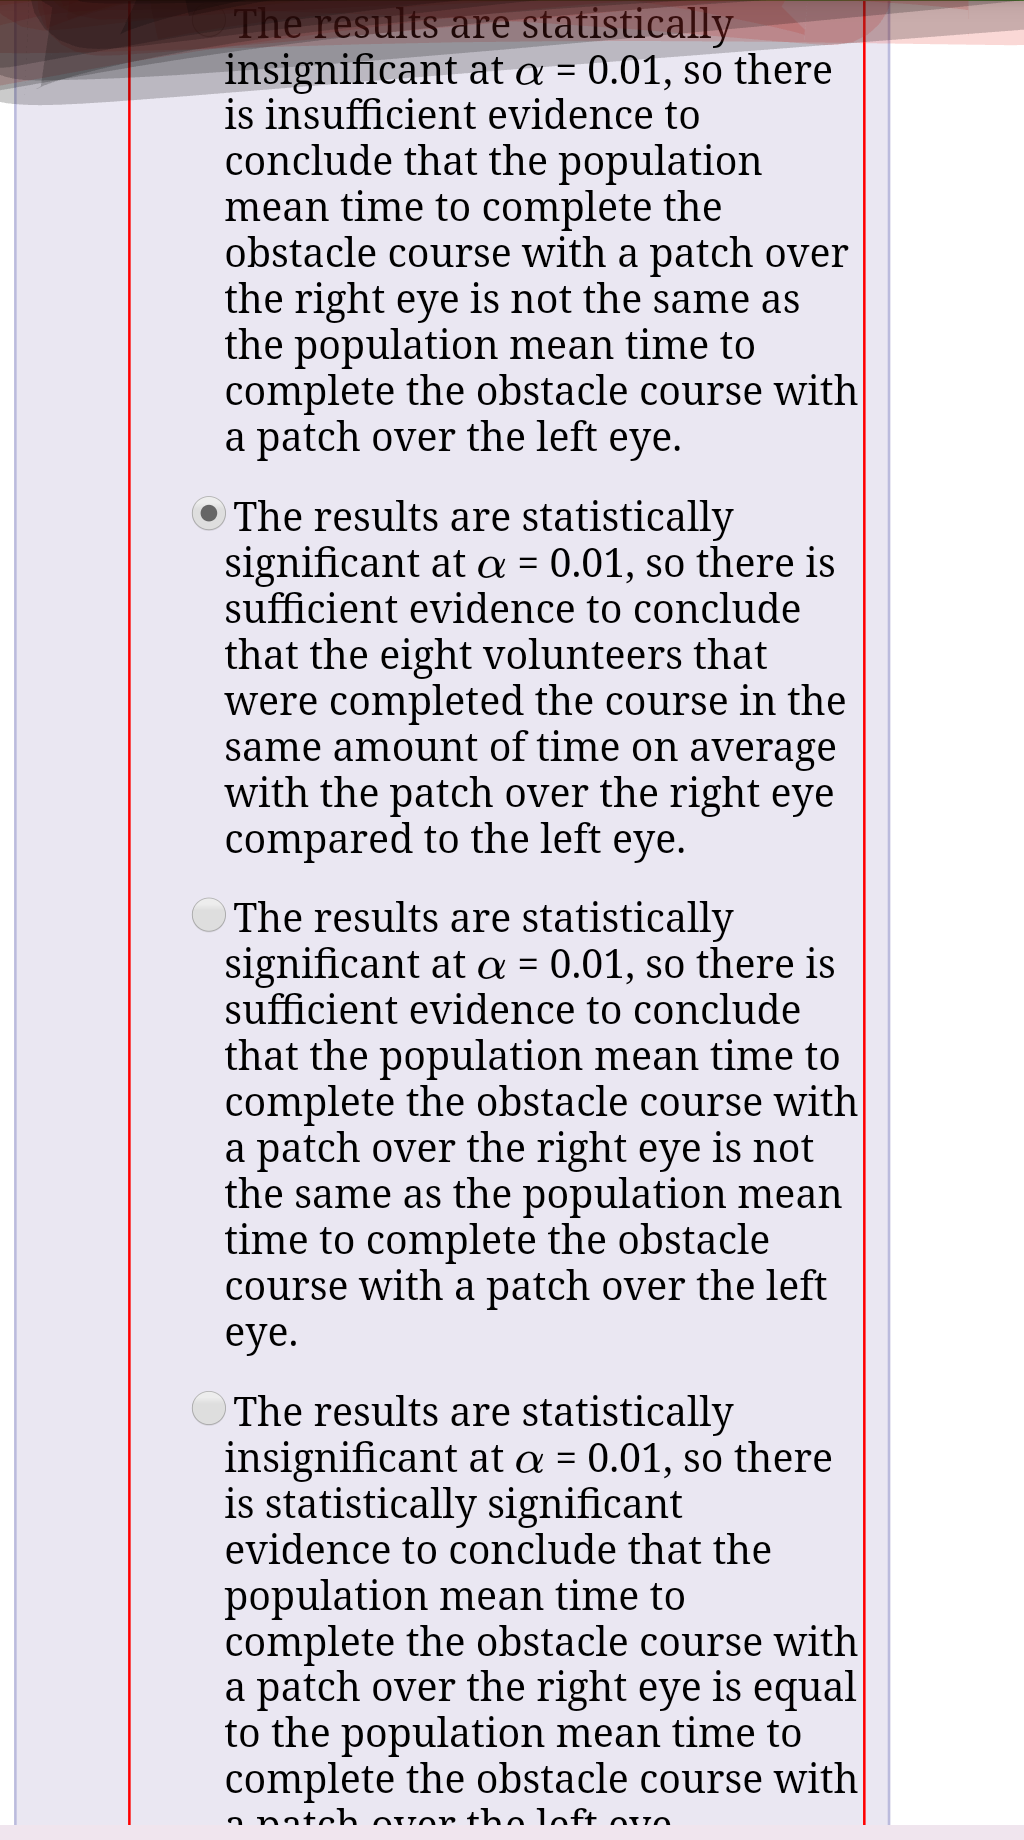 The results are statistically
insignificant at a = 0.01, so there
is insufficient evidence to
conclude that the population
mean time to complete the
obstacle course with a patch over
the right eye is not the same as
the population mean time to
complete the obstacle course with
a patch over the left eye.
The results are statistically
significant at a = 0.01, so there is
sufficient evidence to conclude
that the eight volunteers that
were completed the course in the
same amount of time on average
with the patch over the right eye
compared to the left eye.
The results are statistically
significant at a = 0.01, so there is
sufficient evidence to conclude
that the population mean time to
complete the obstacle course with
a patch over the right eye is not
the same as the population mean
time to complete the obstacle
course with a patch over the left
eye.
O The results are statistically
insignificant at a = 0.01, so there
is statistically significant
evidence to conclude that the
population mean time to
complete the obstacle course with
a patch over the right eye is equal
to the population mean time to
complete the obstacle course with
a natch Qvor tho loft ovo
